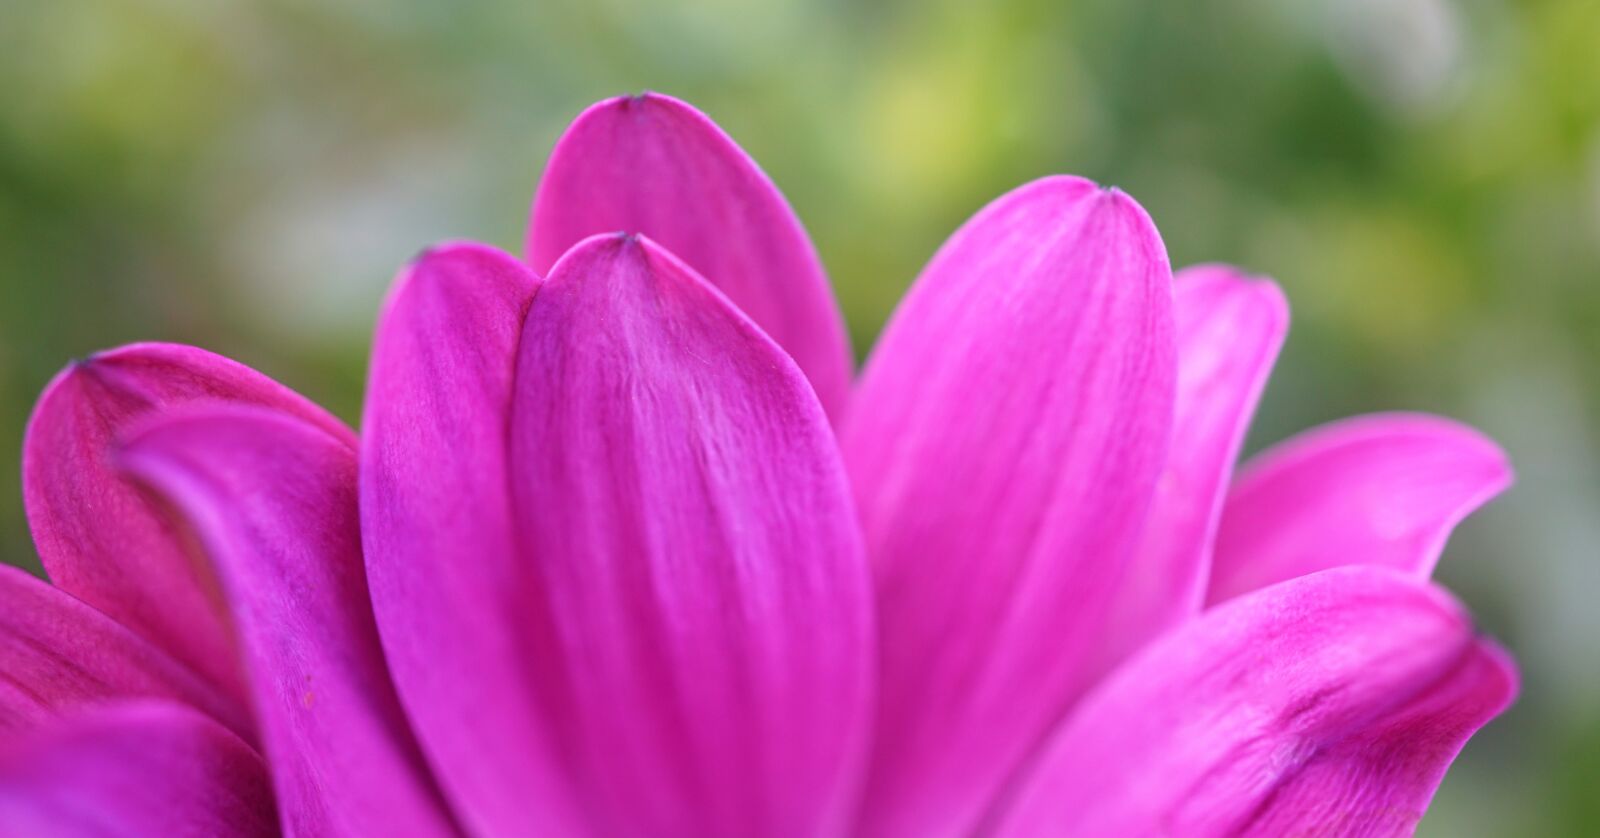 Sony a6000 sample photo. Pink petals, strong color photography